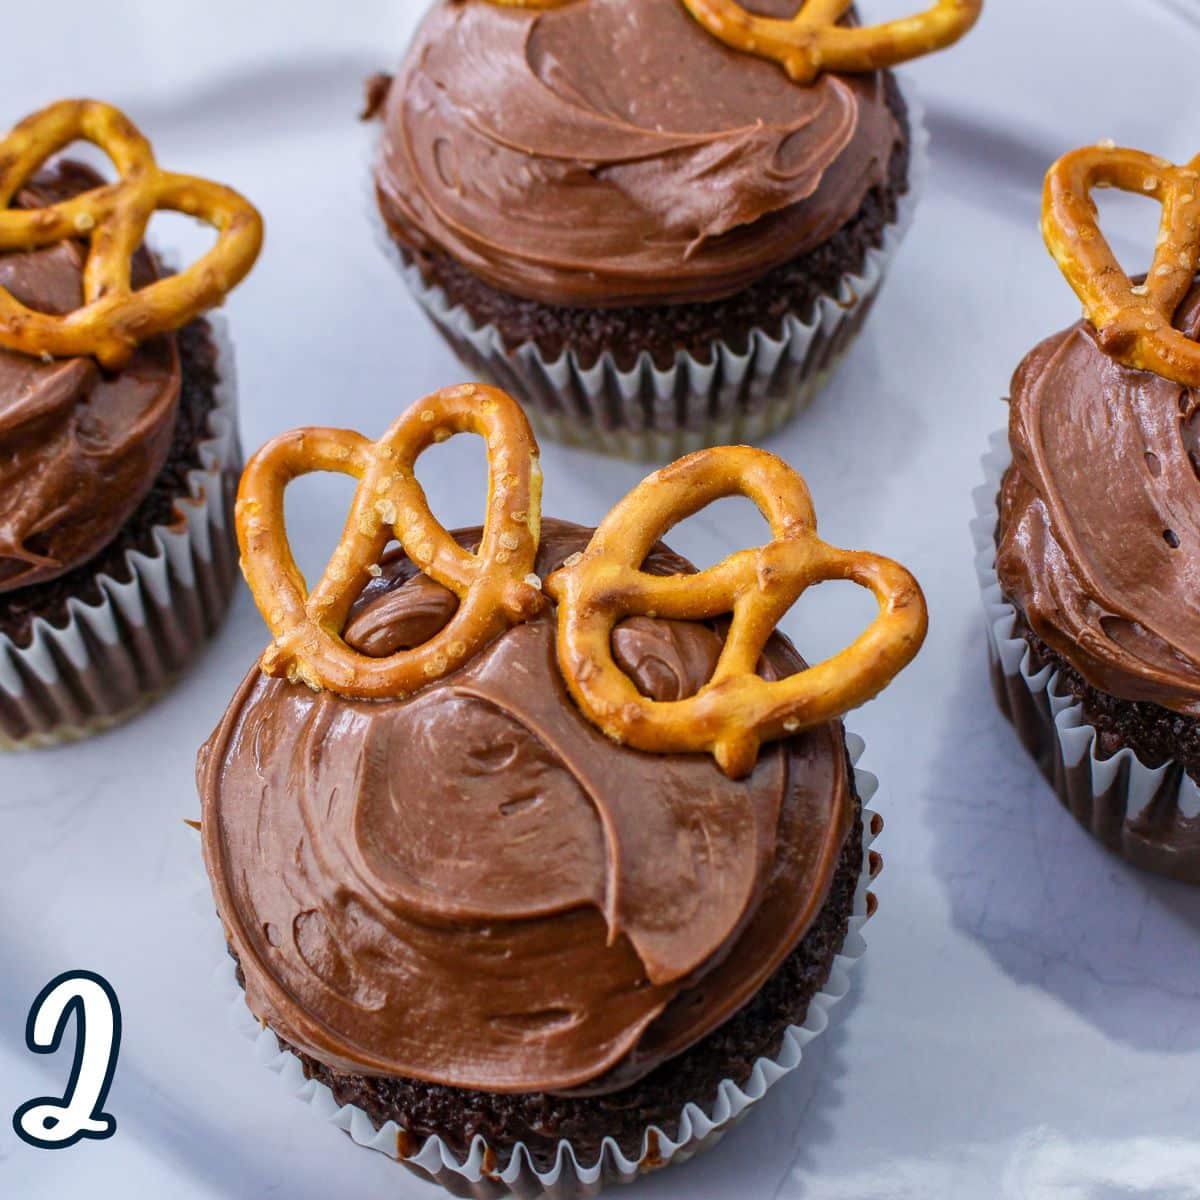 Chocolate cupcakes with pretzels on a plate.